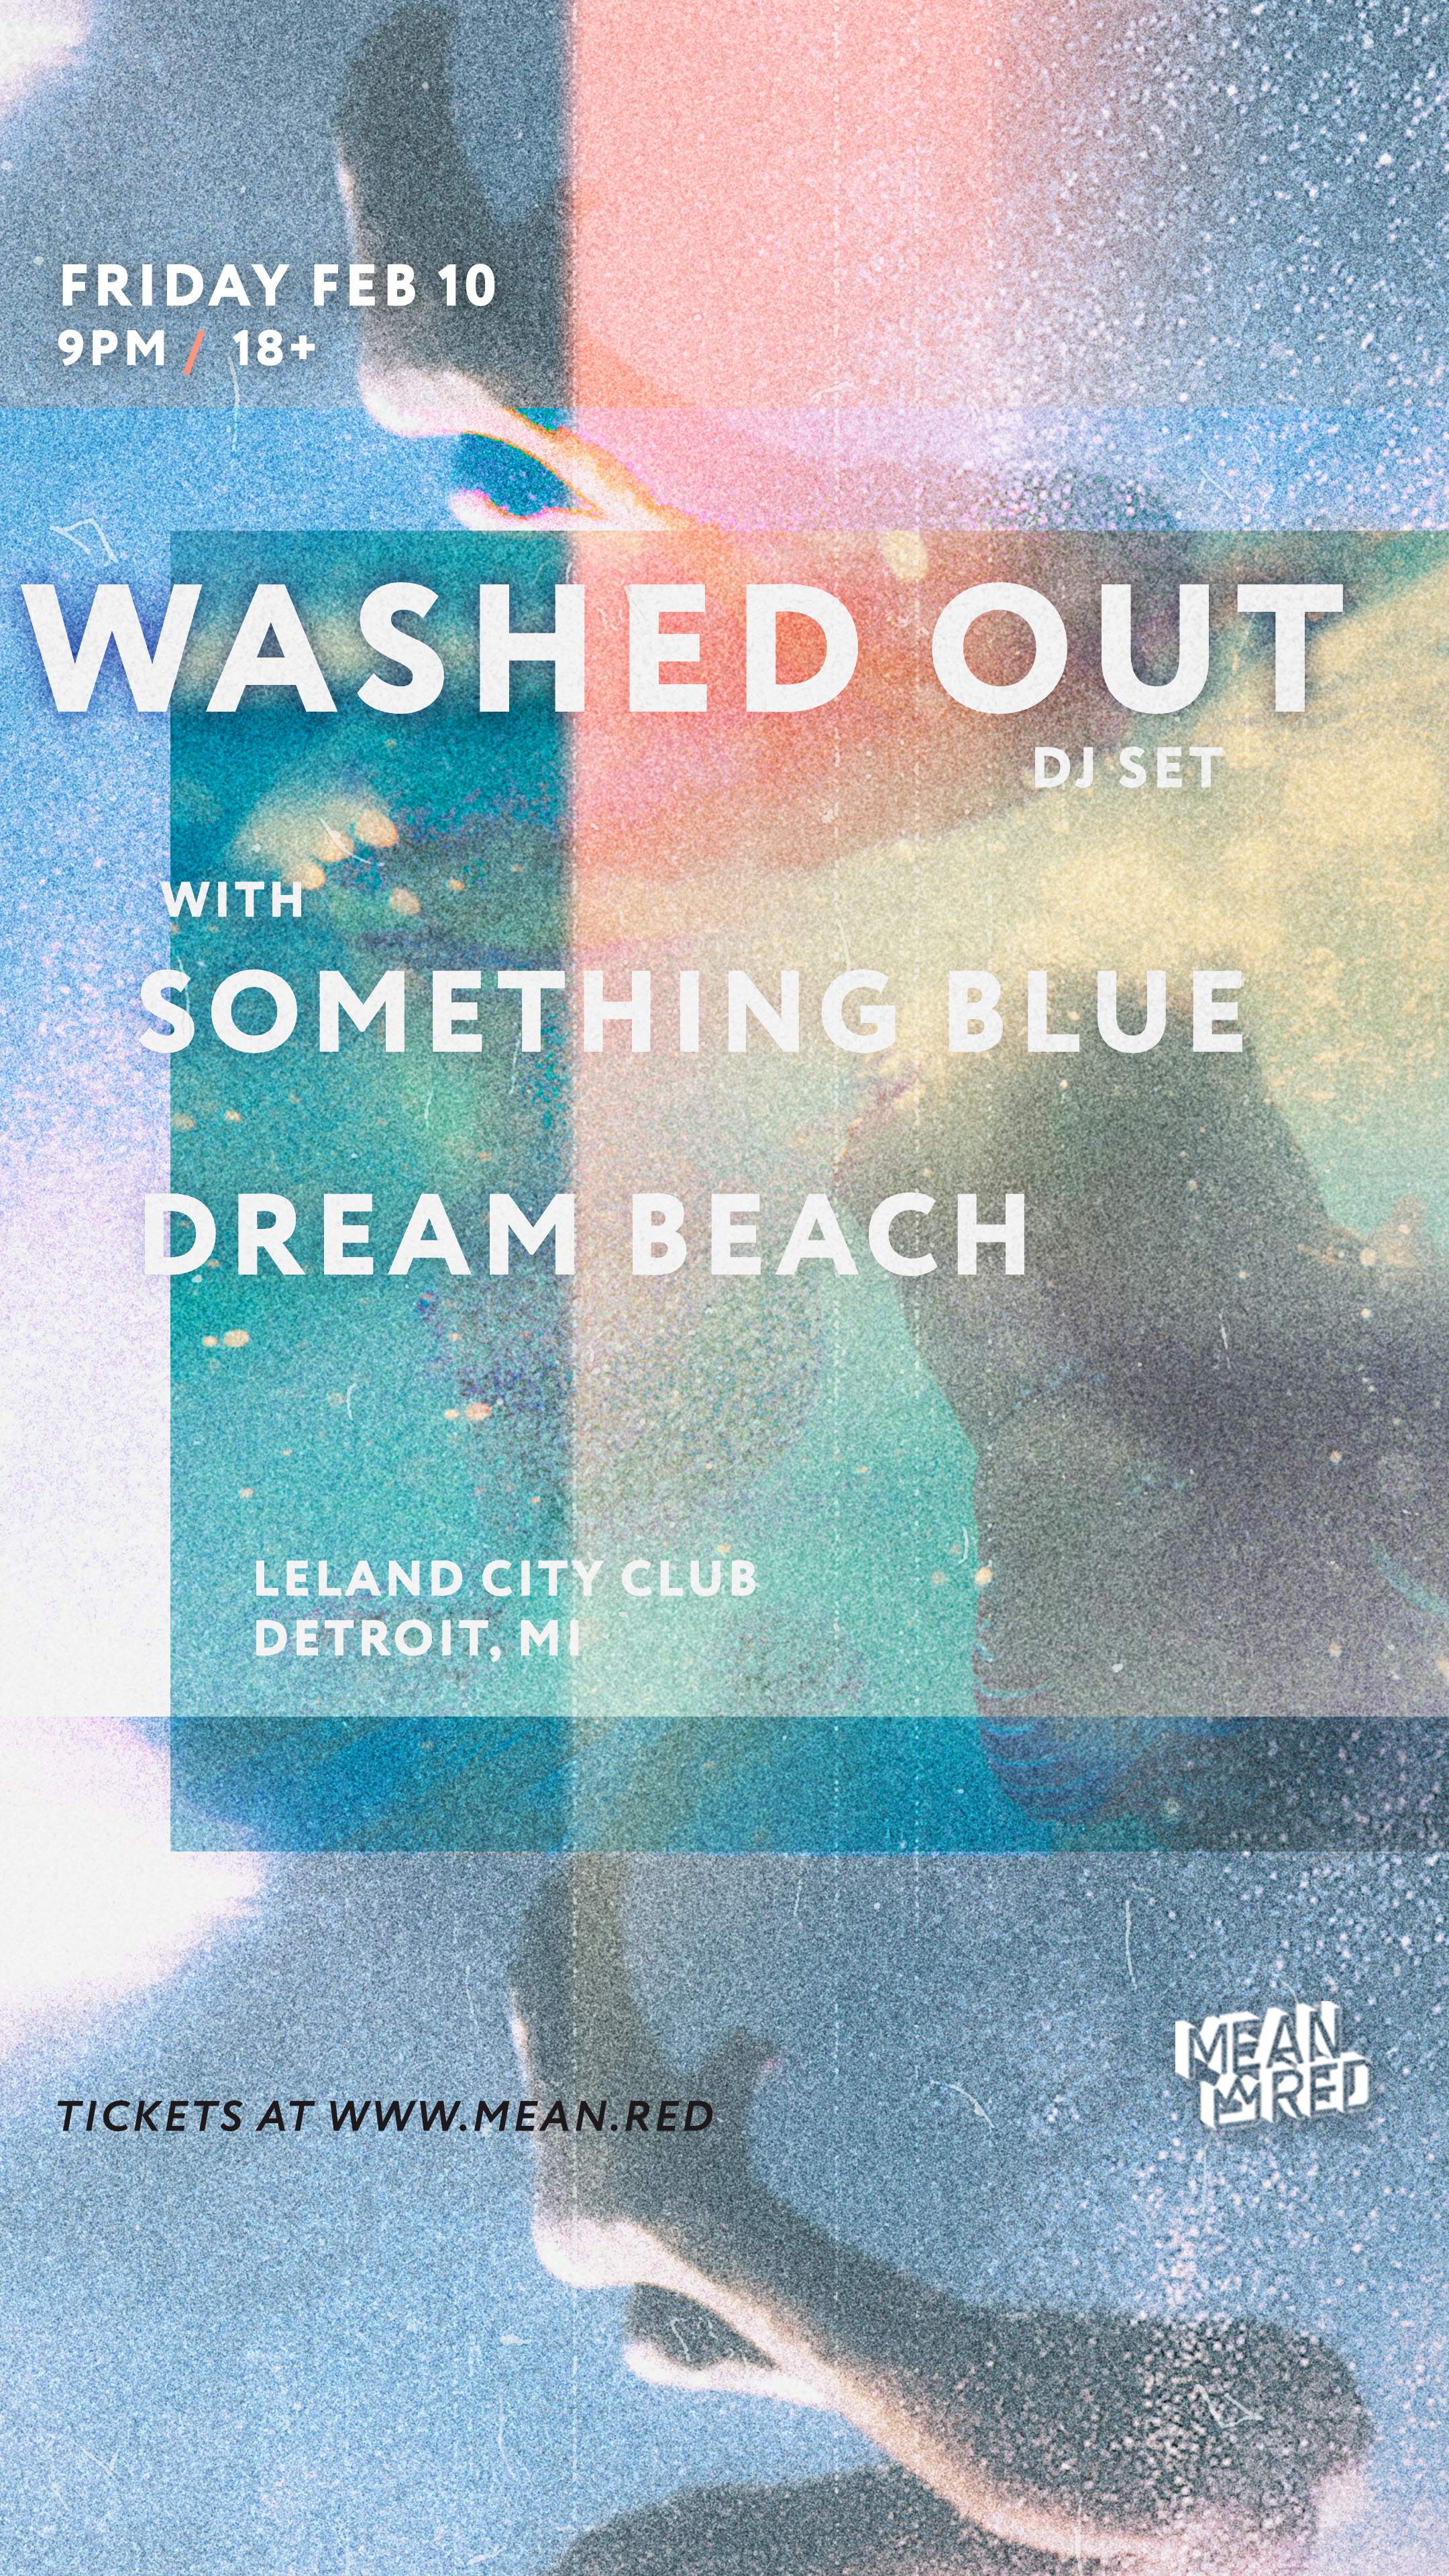 Washed Out (DJ Set) - フライヤー表